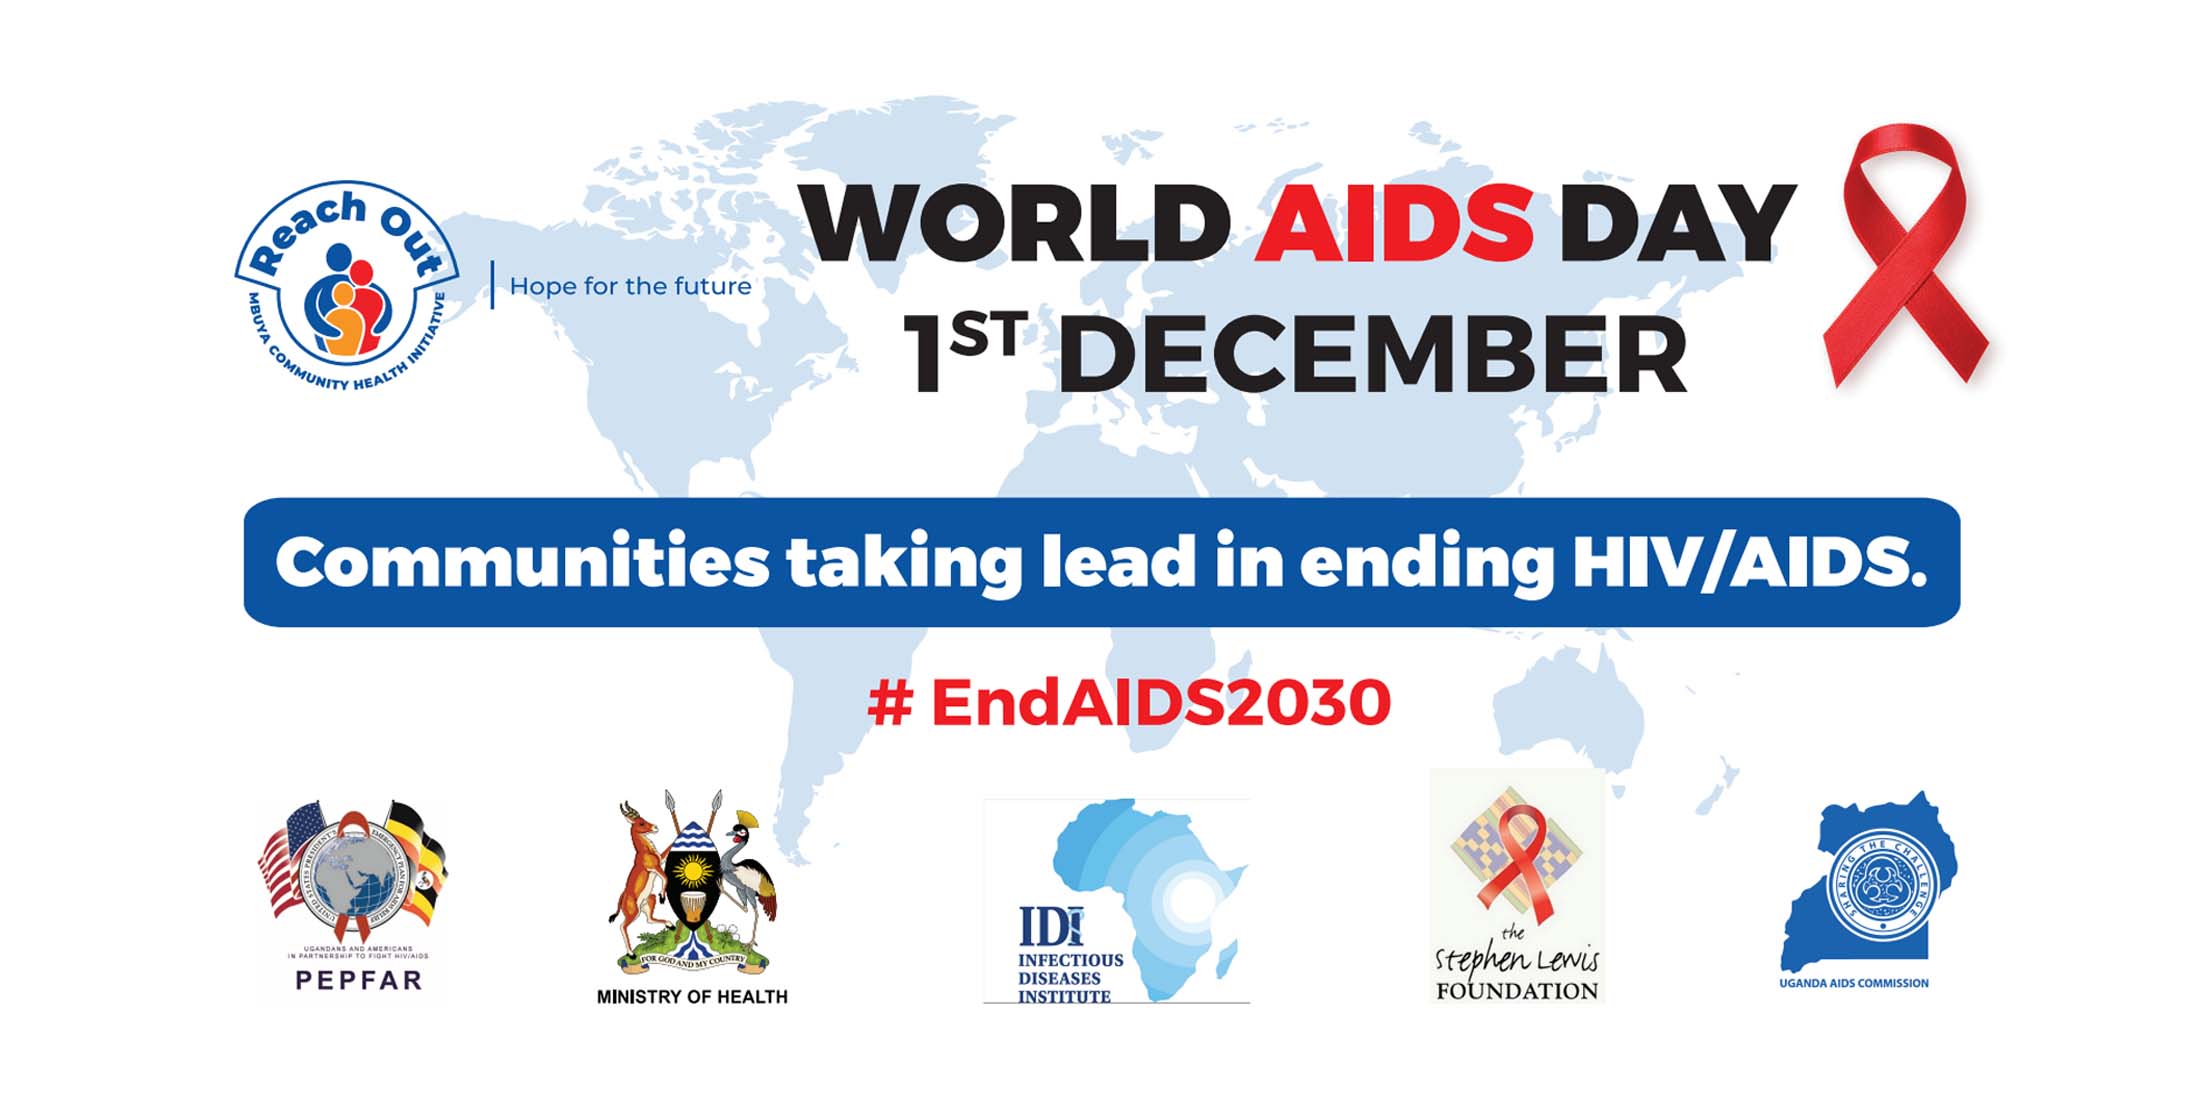 COMMEMORATION OF WORLD AIDS DAY